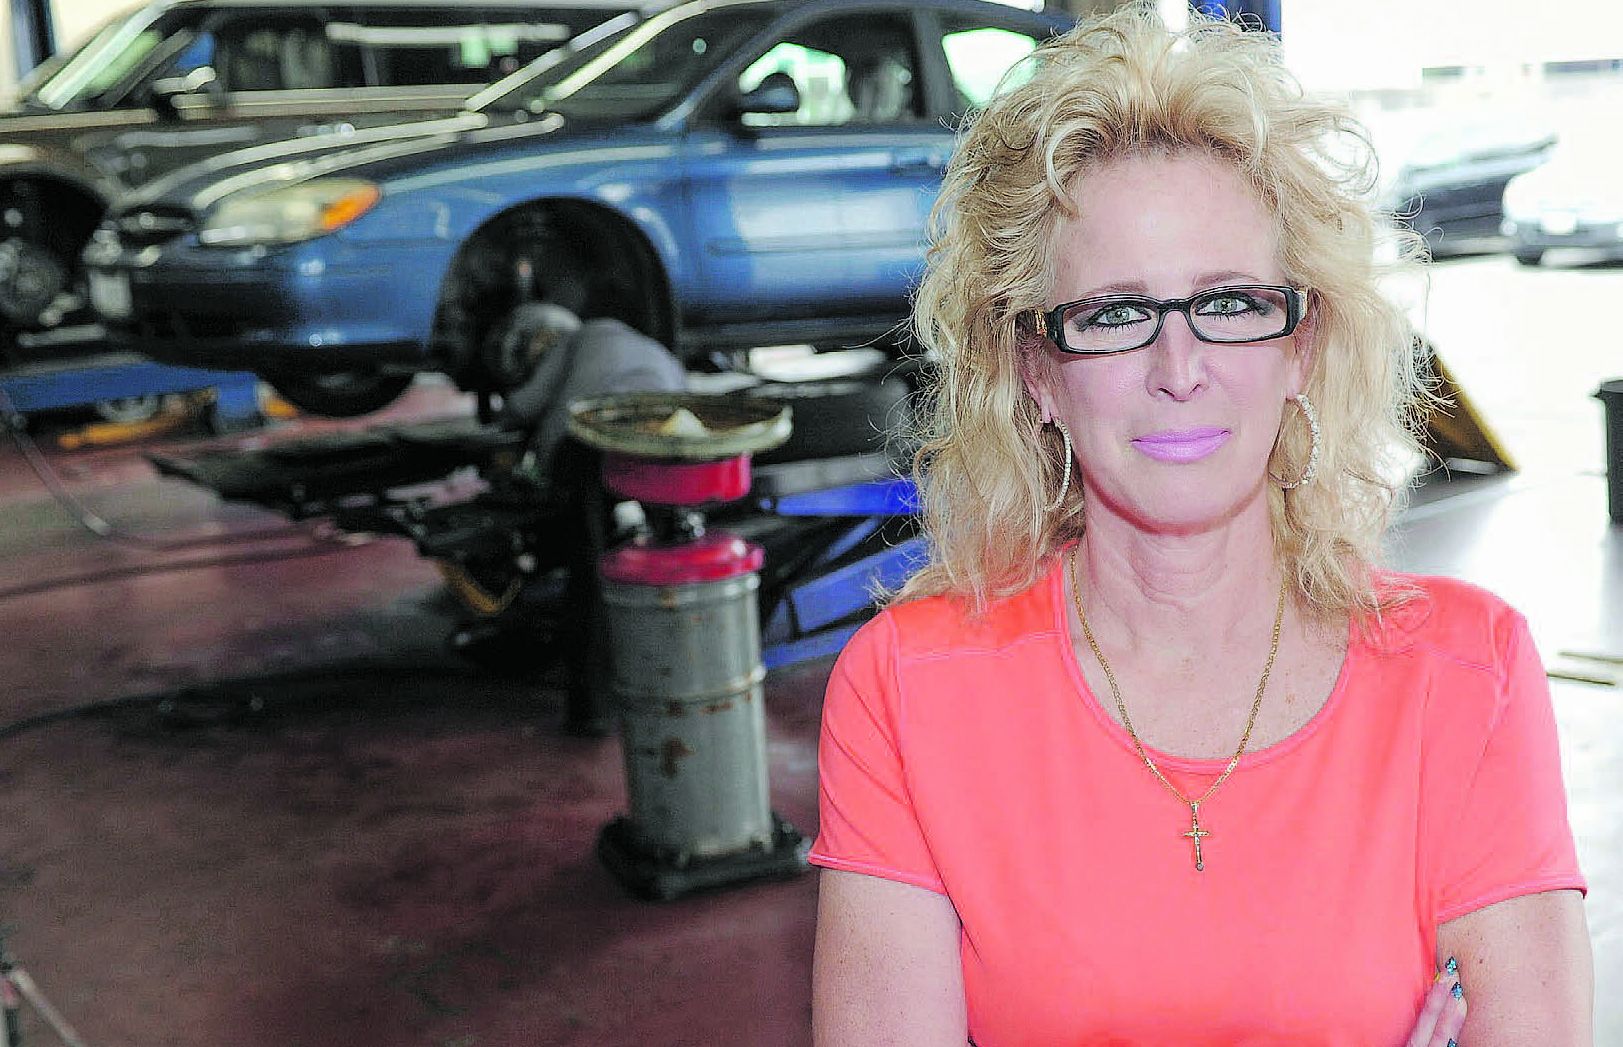 judy-jobse-auto-expert-carves-own-road-driving